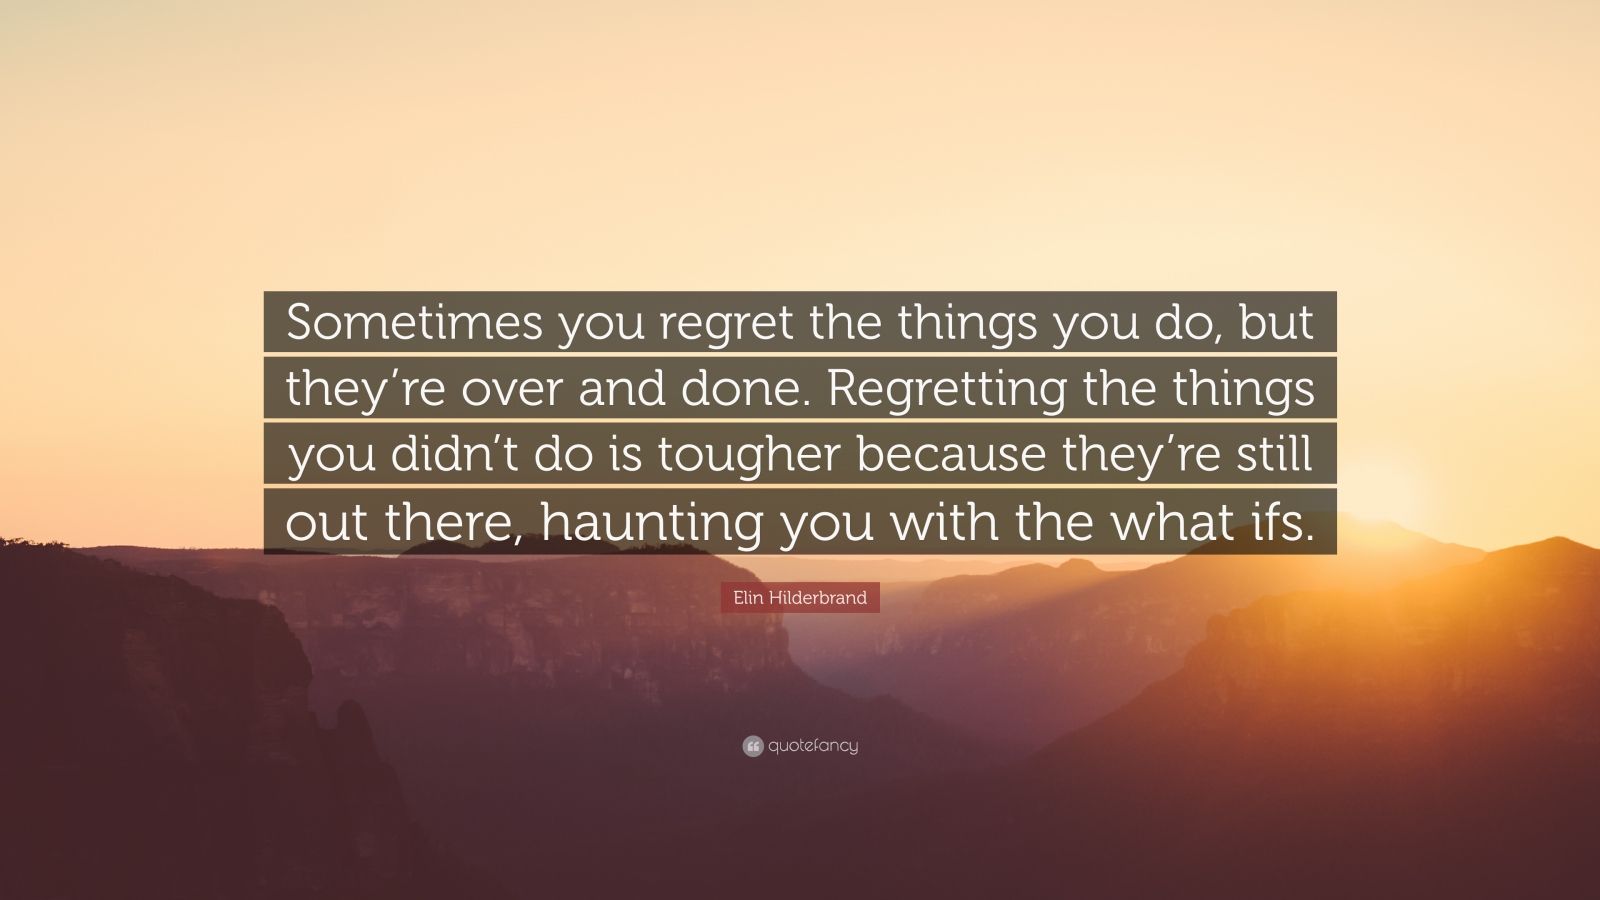 Elin Hilderbrand Quote: “Sometimes you regret the things you do, but ...